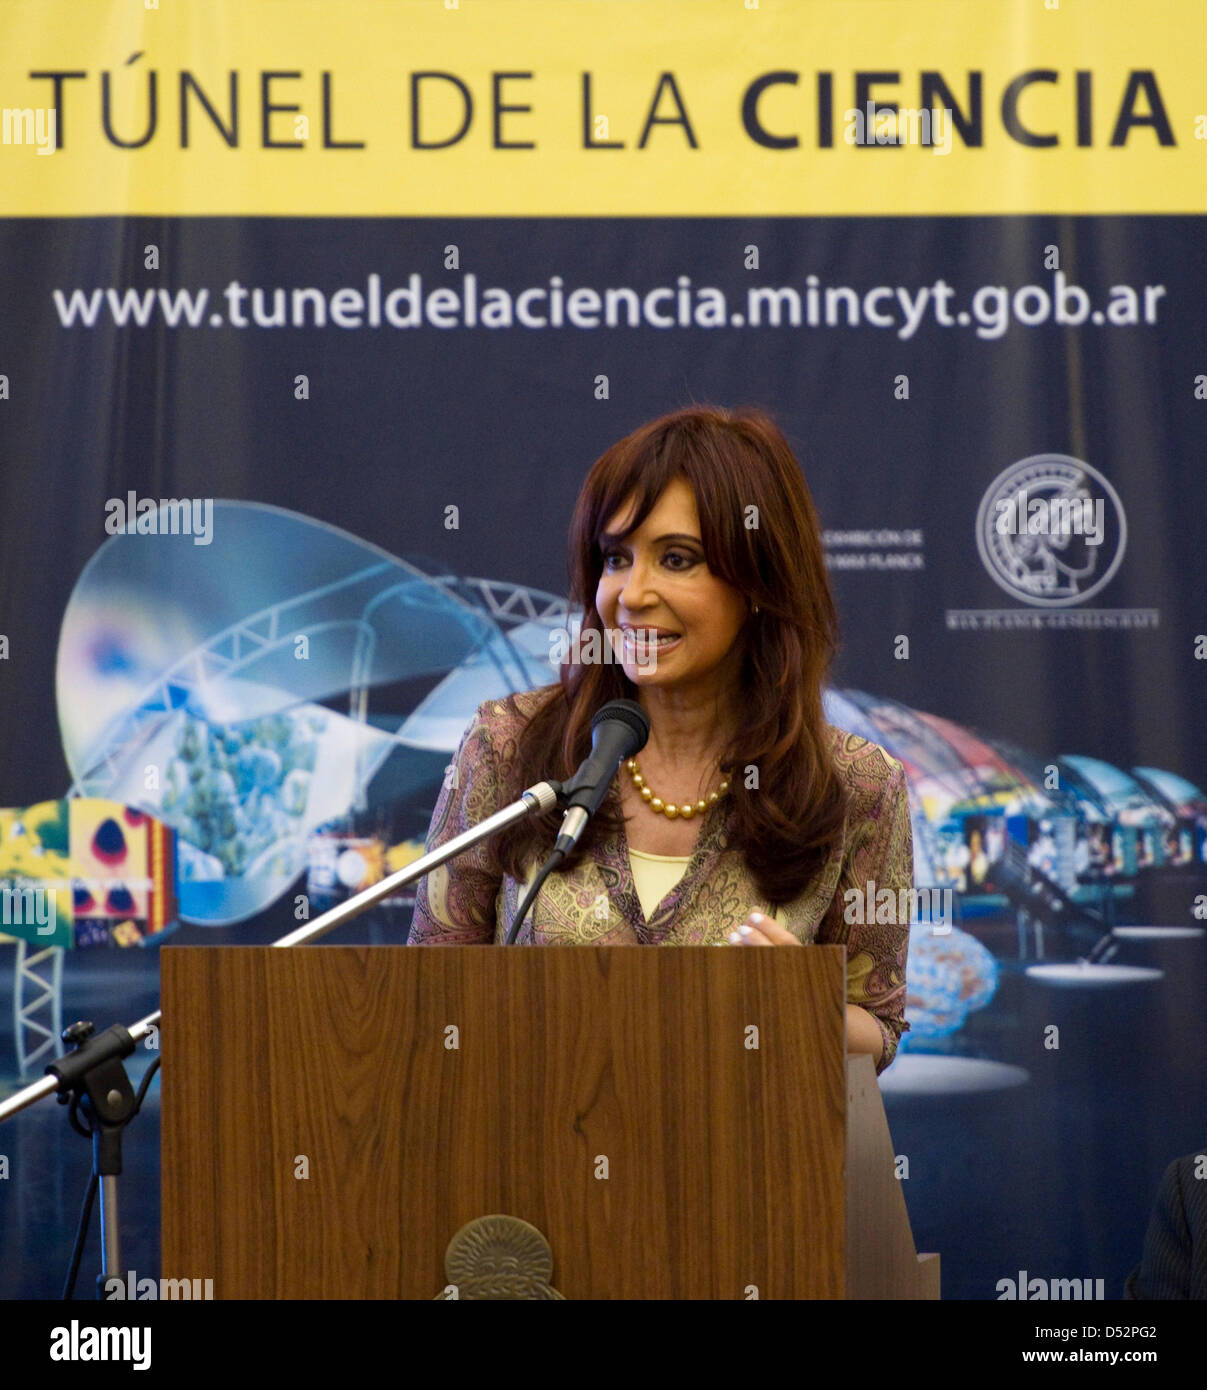 Argentine President Cristina Fernandez de Kirchner speaks at the opening ceremony of the 'Science Tunnel' of the Argentine Education Ministry in Buenos Aires, Argentina, 08 March 2010. Photo: ARNO BURGI Stock Photo